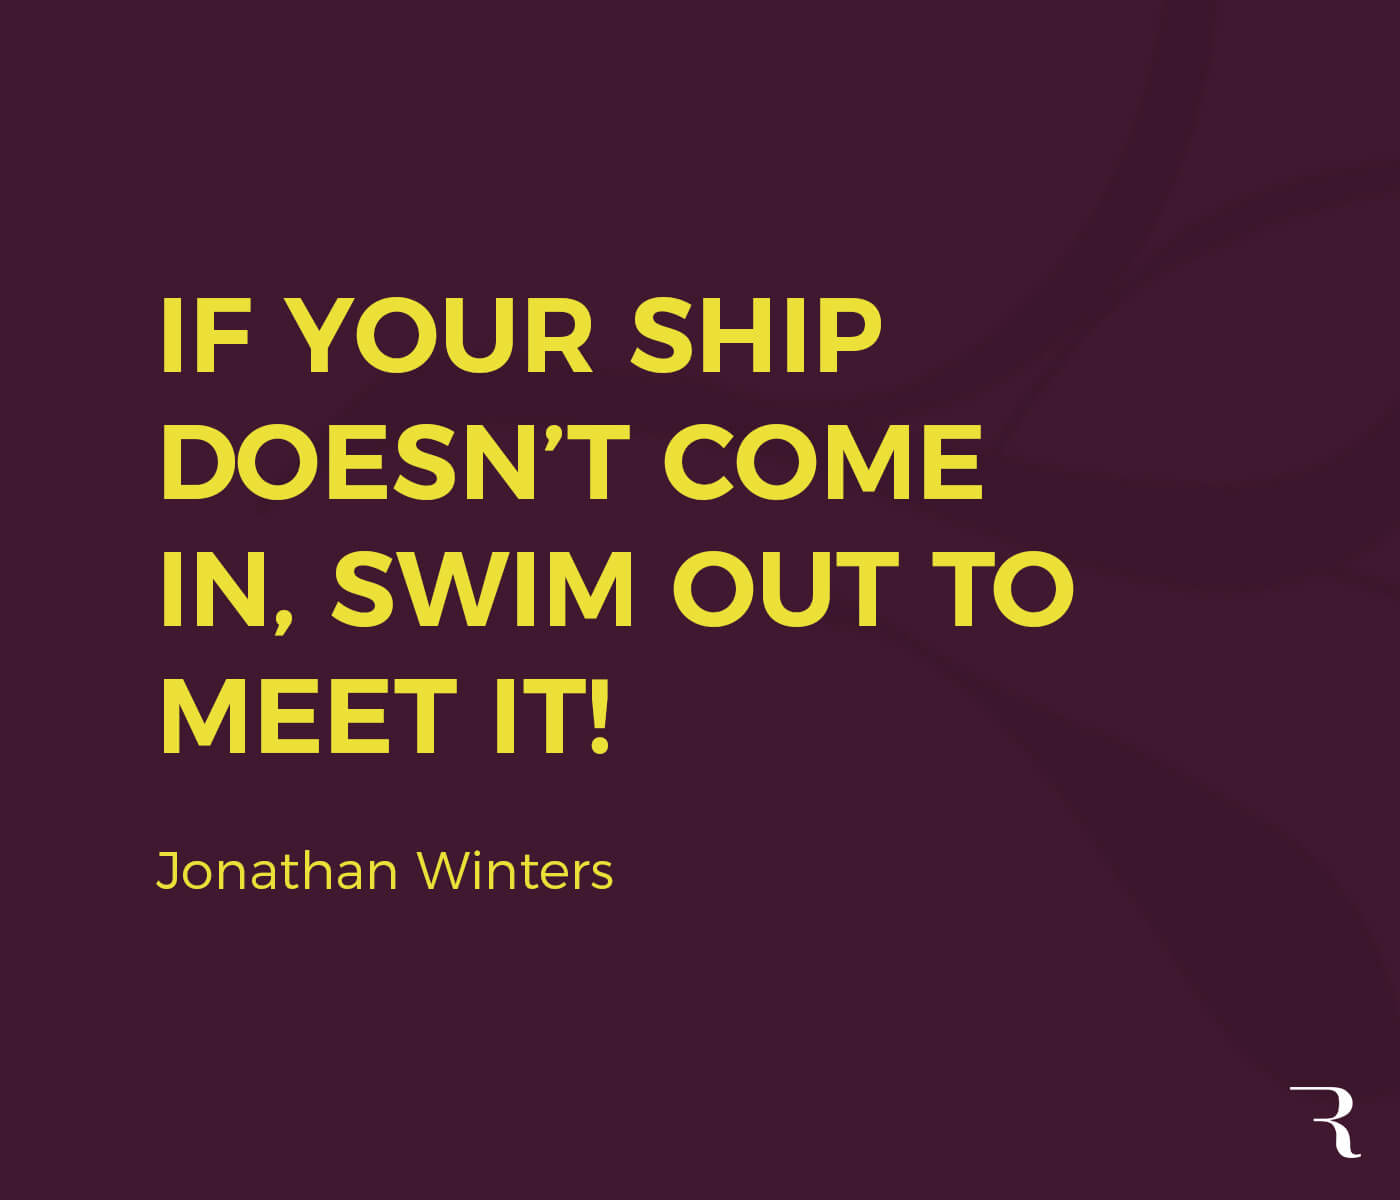 Motivational Quotes: "If your ship doesn’t come in, swim out to meet it!" 112 Motivational Quotes to Be a Better Entrepreneur